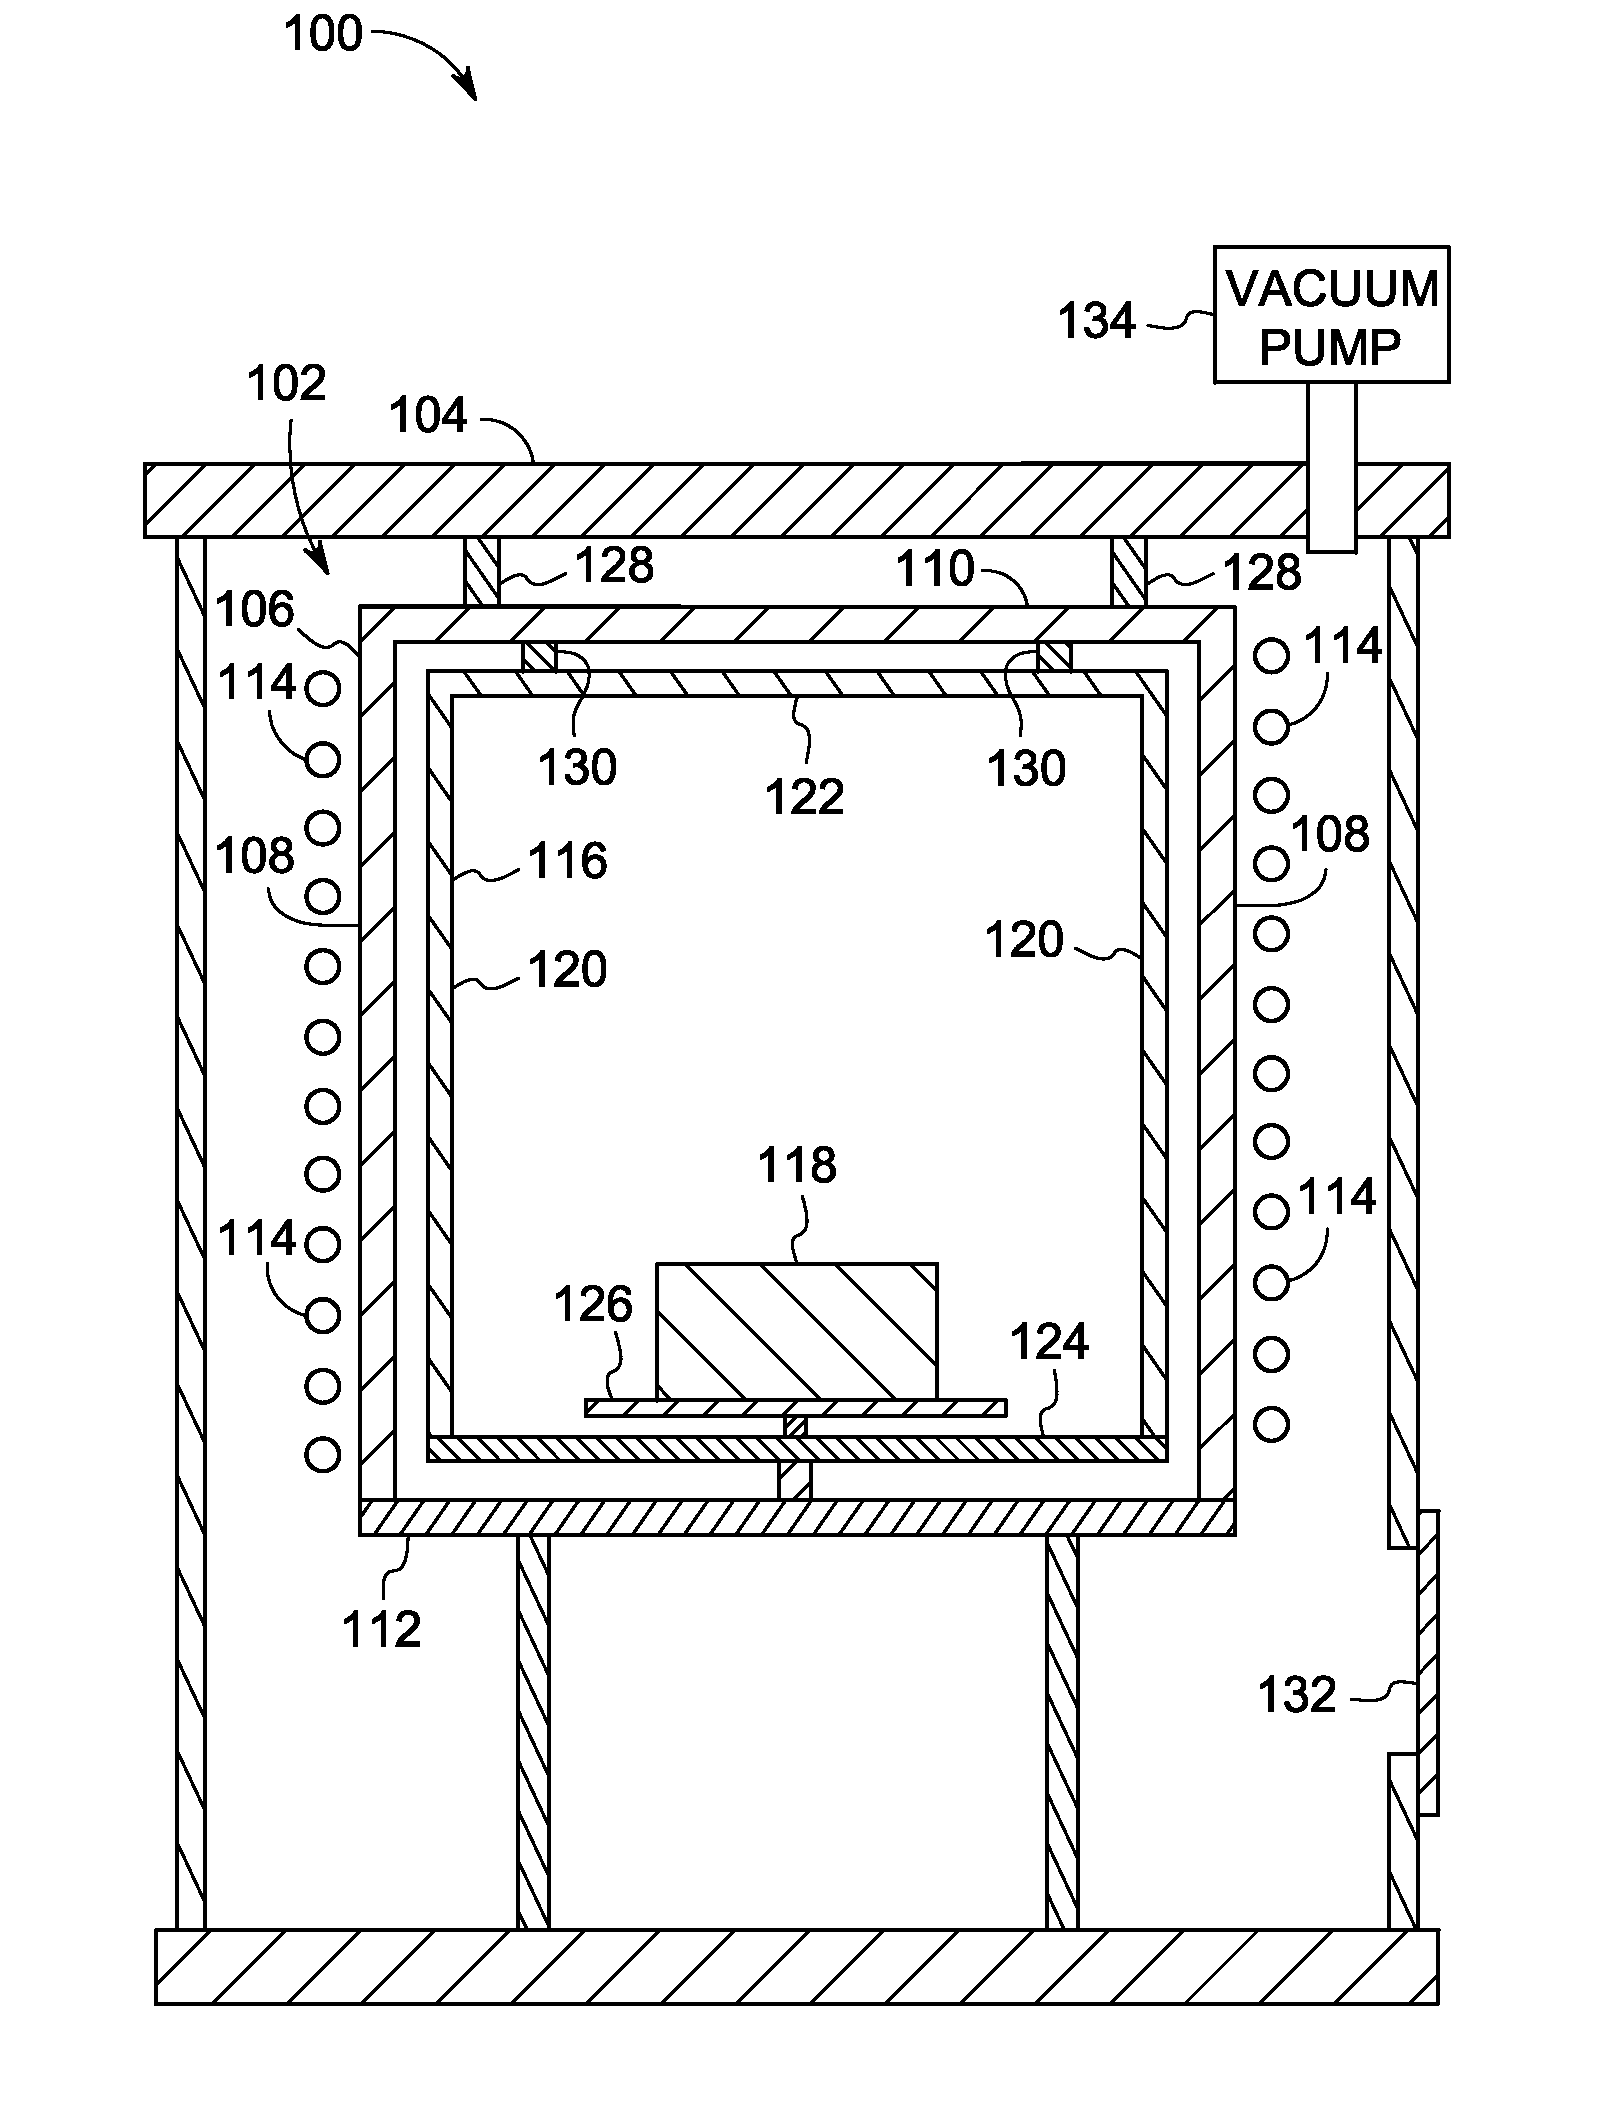 System for gas purification in an induction vacuum furnace and method of making same